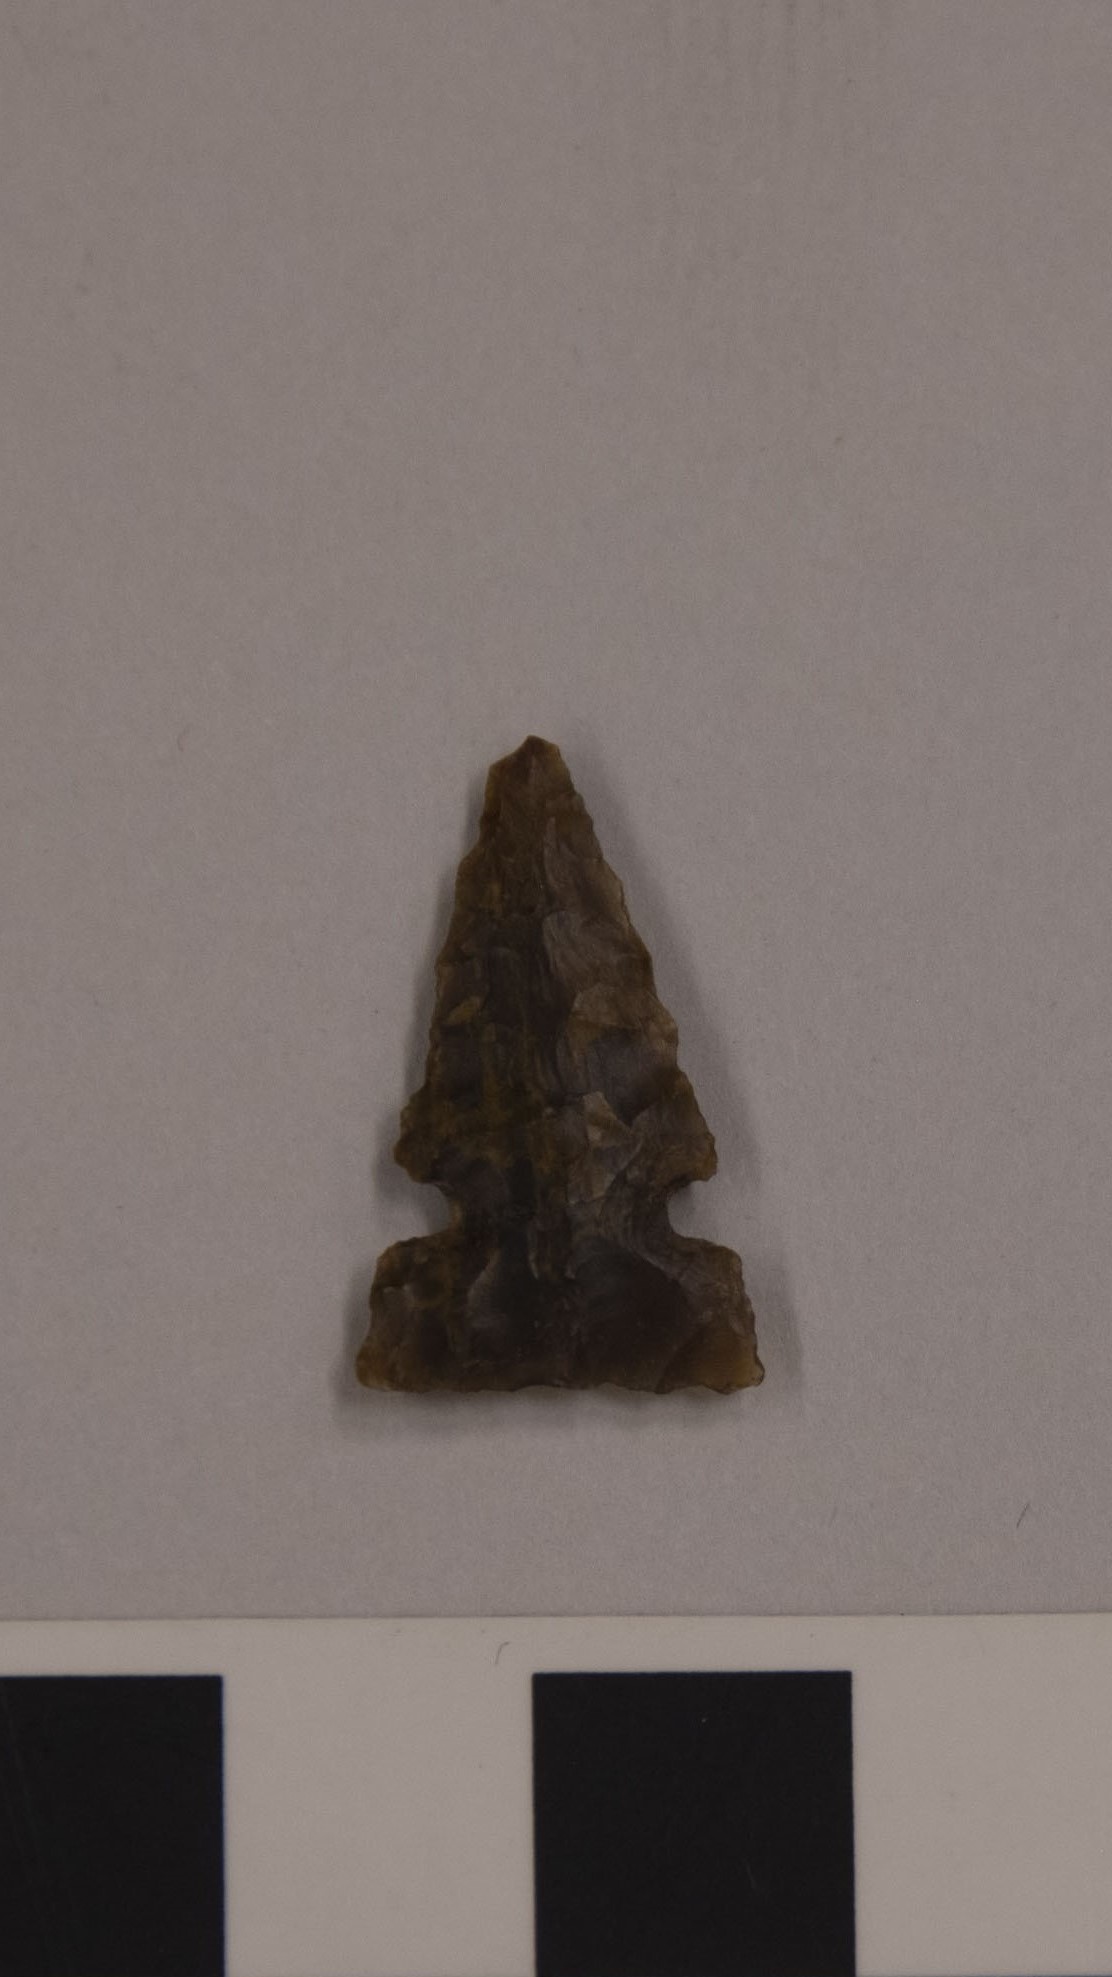 projectile point